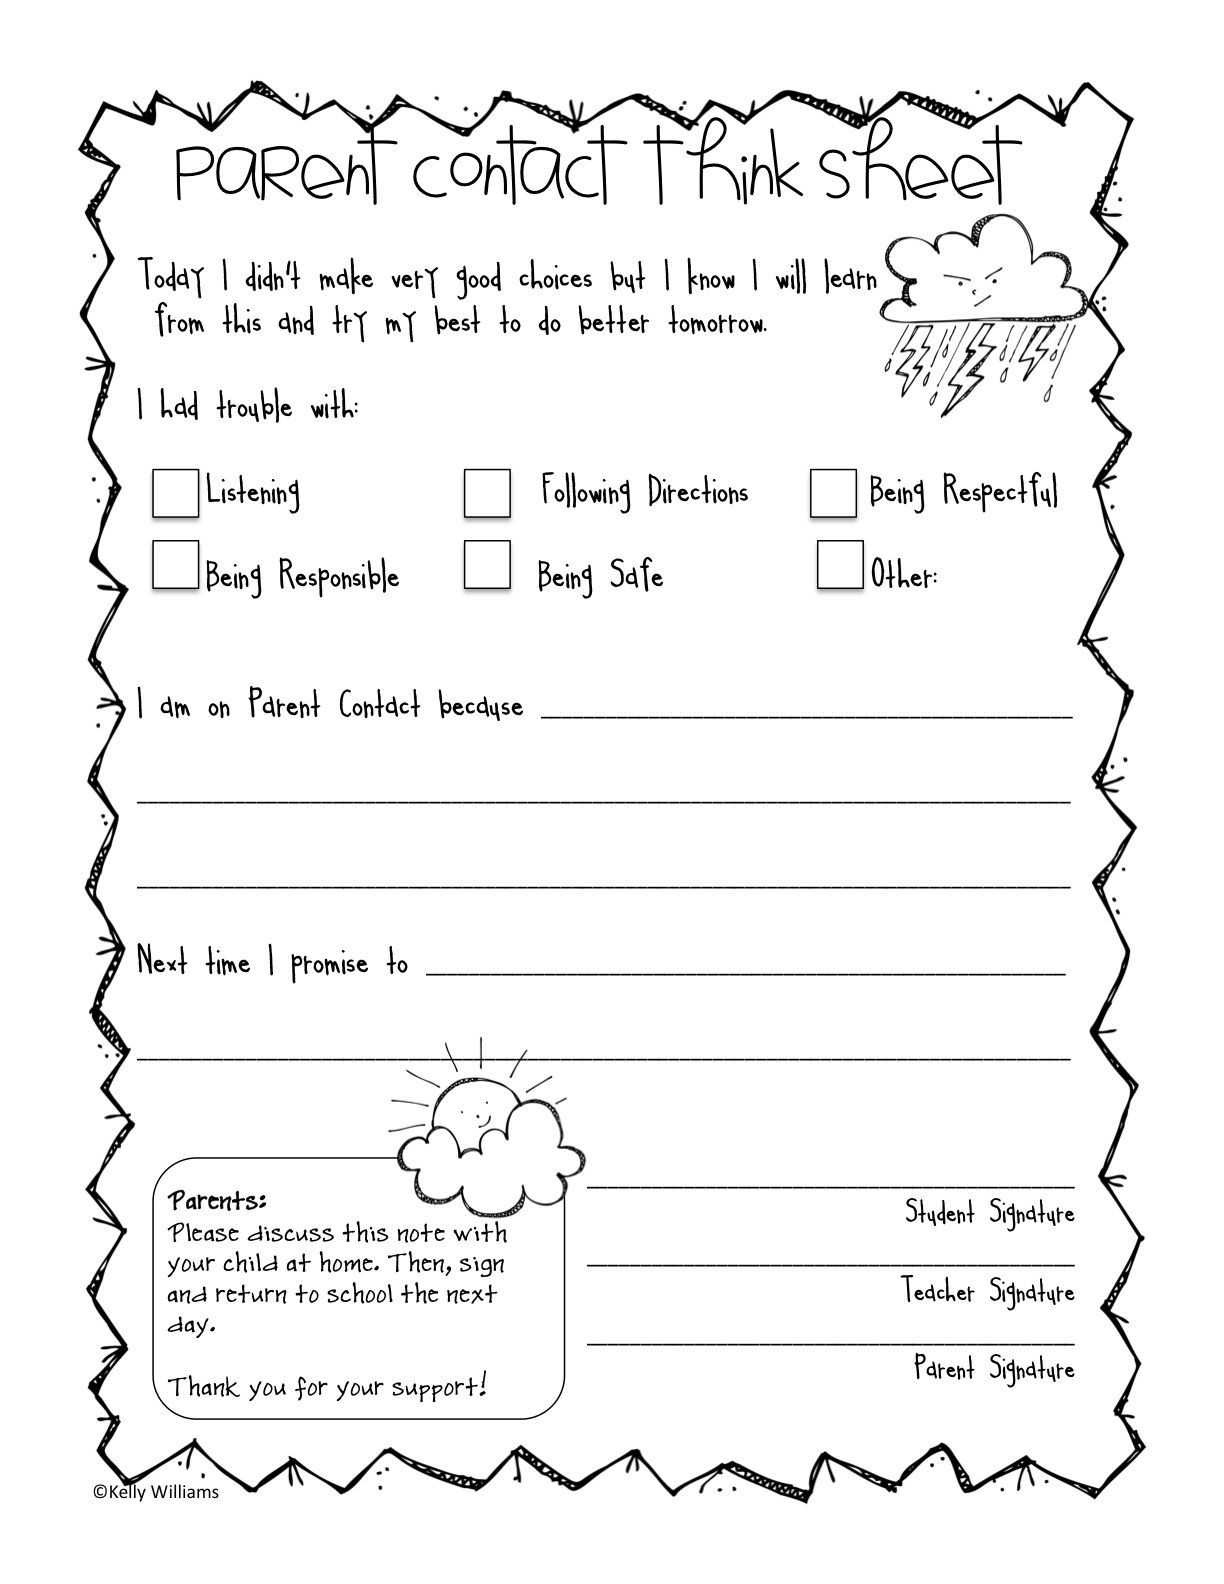 Following Directions Worksheet Along with School Contract for Students Elegant Sliding Into Second Grade